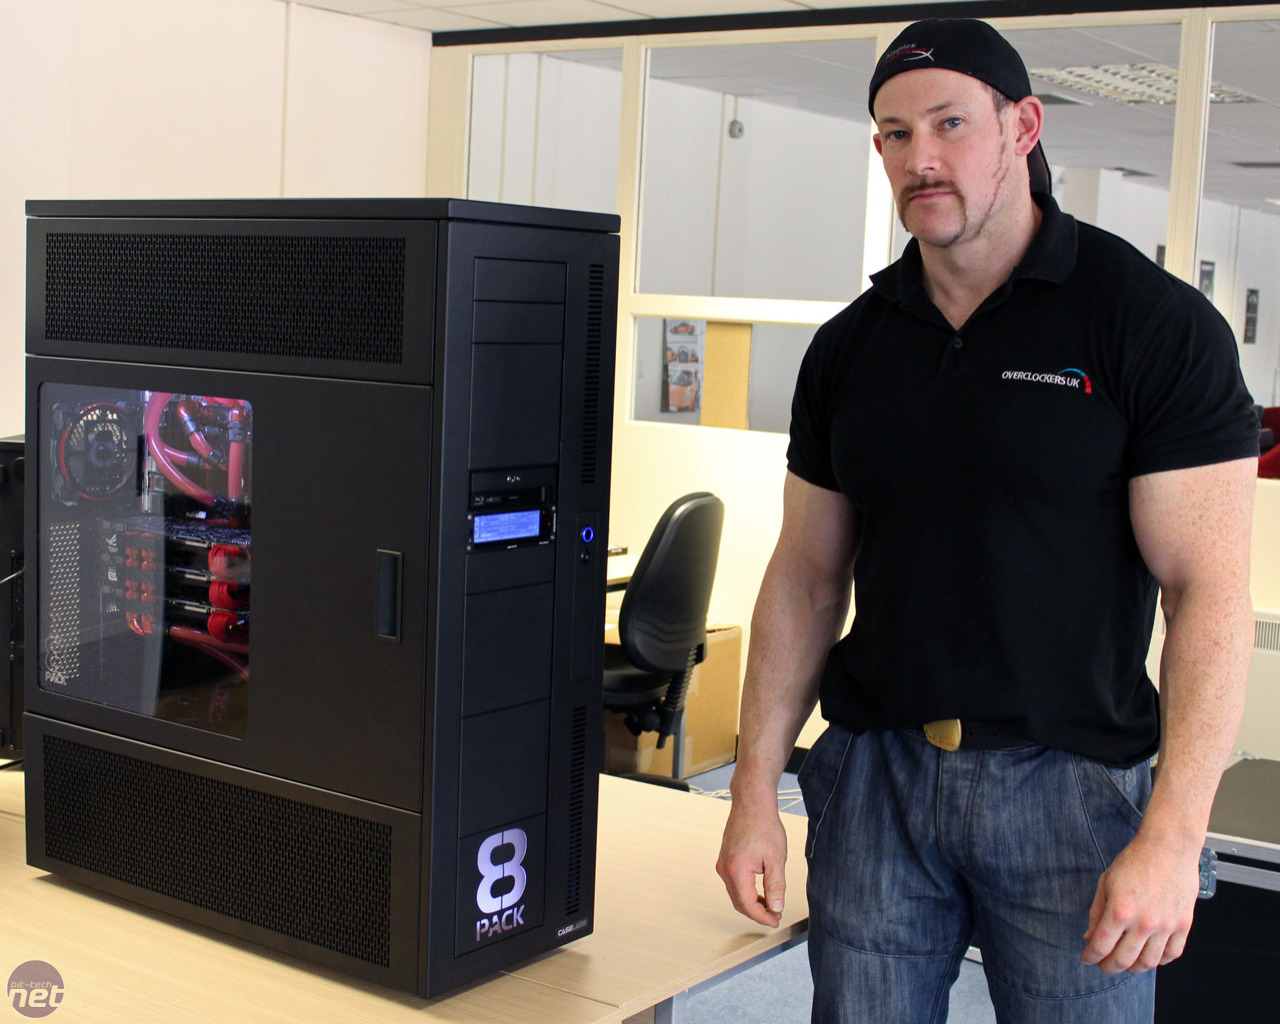 Overclockers UK 8Pack Systems Preview and Interview | bit ...
